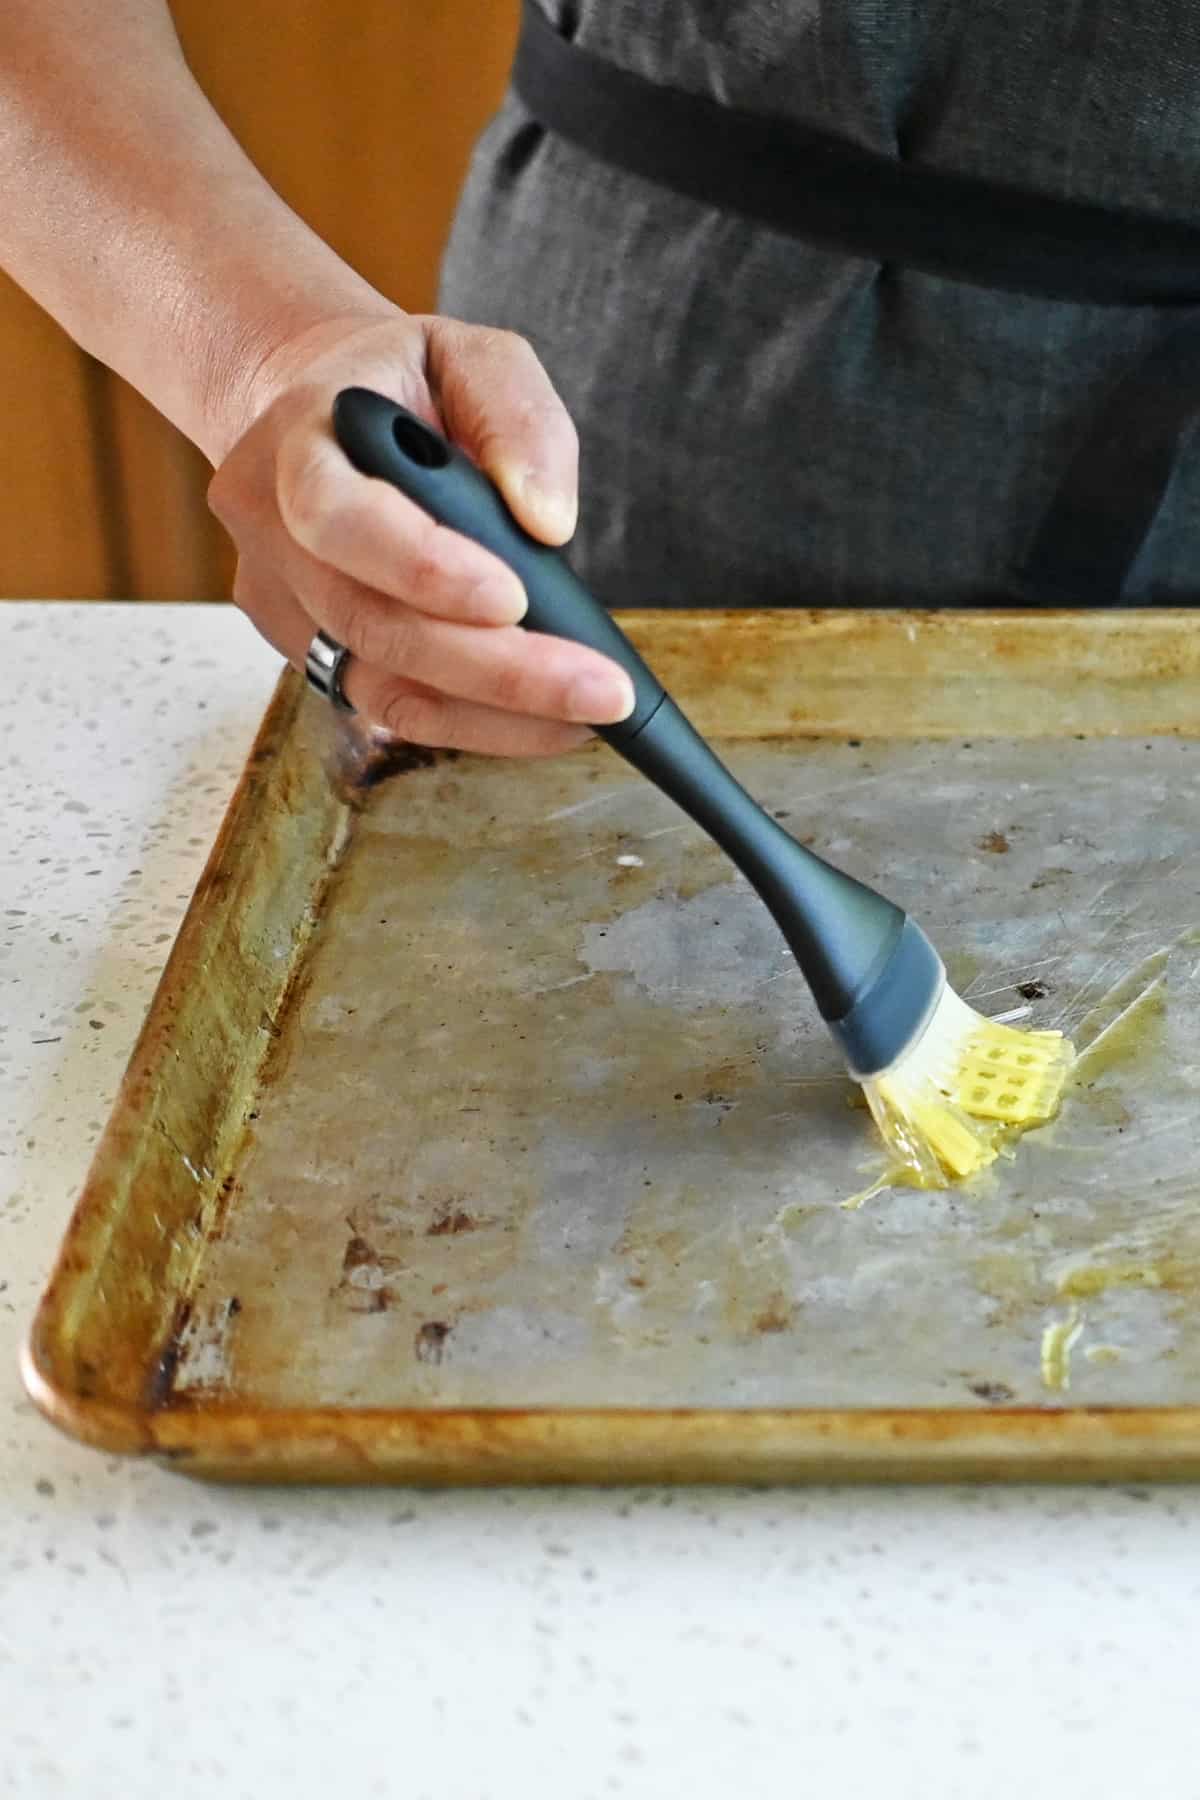 A silicone brush is spreading extra virgin olive oil evenly on a rimmed baking sheet.